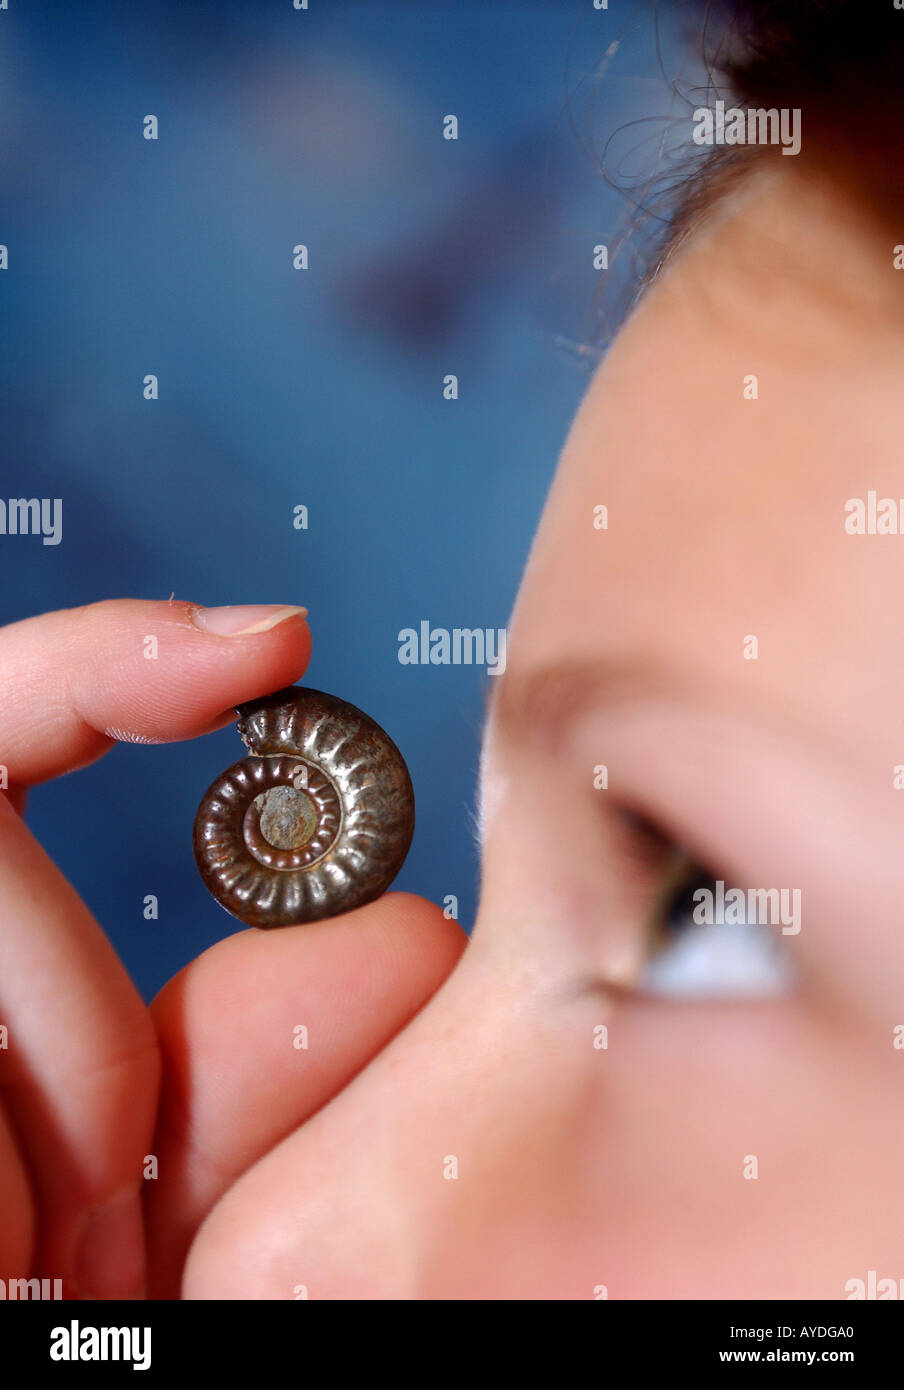 A young girl looking closely and examining a fossil picked up at Charmouth Heritage Centre in Dorset. Stock Photo